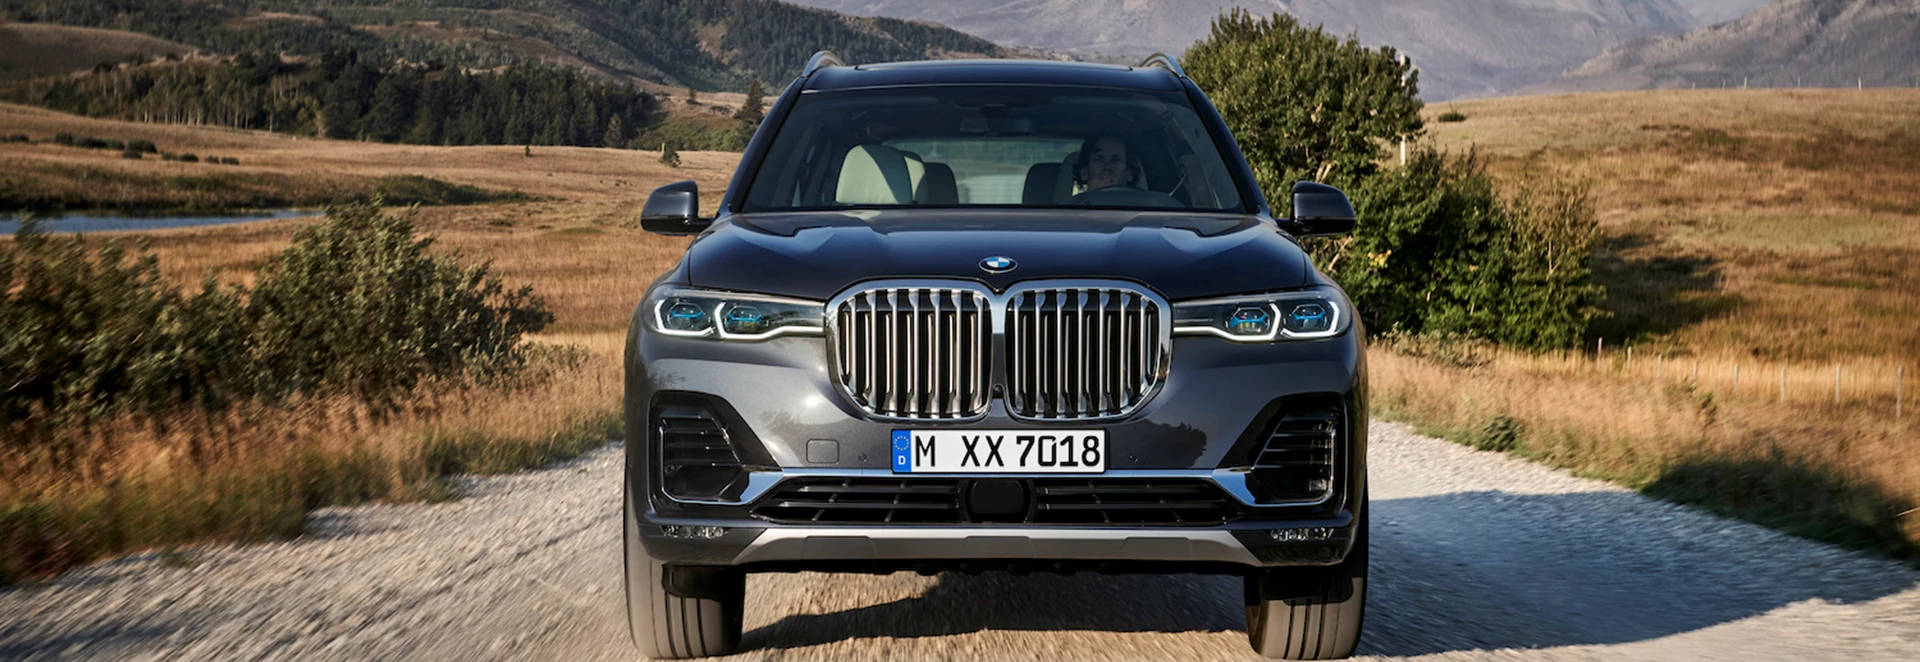 Why the BMW X7 is the most luxurious SUV to date